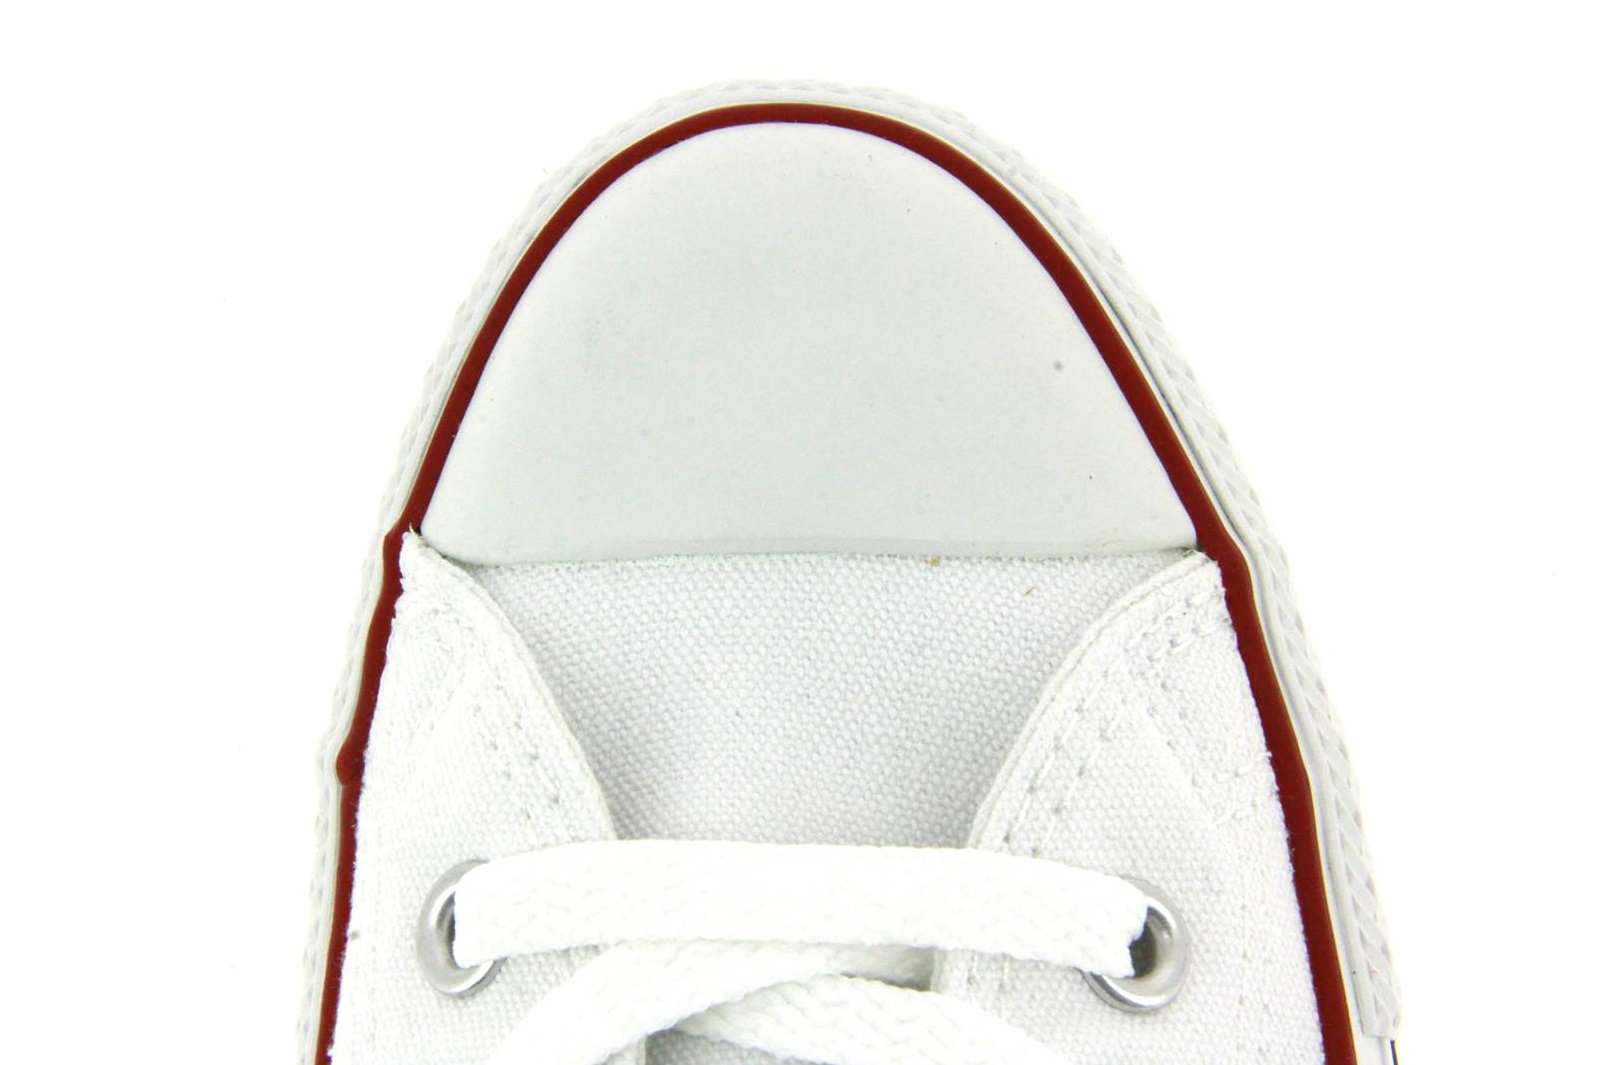 Converse ALL STAR CHUCK TAYLOR OPTIC WHITE (44)